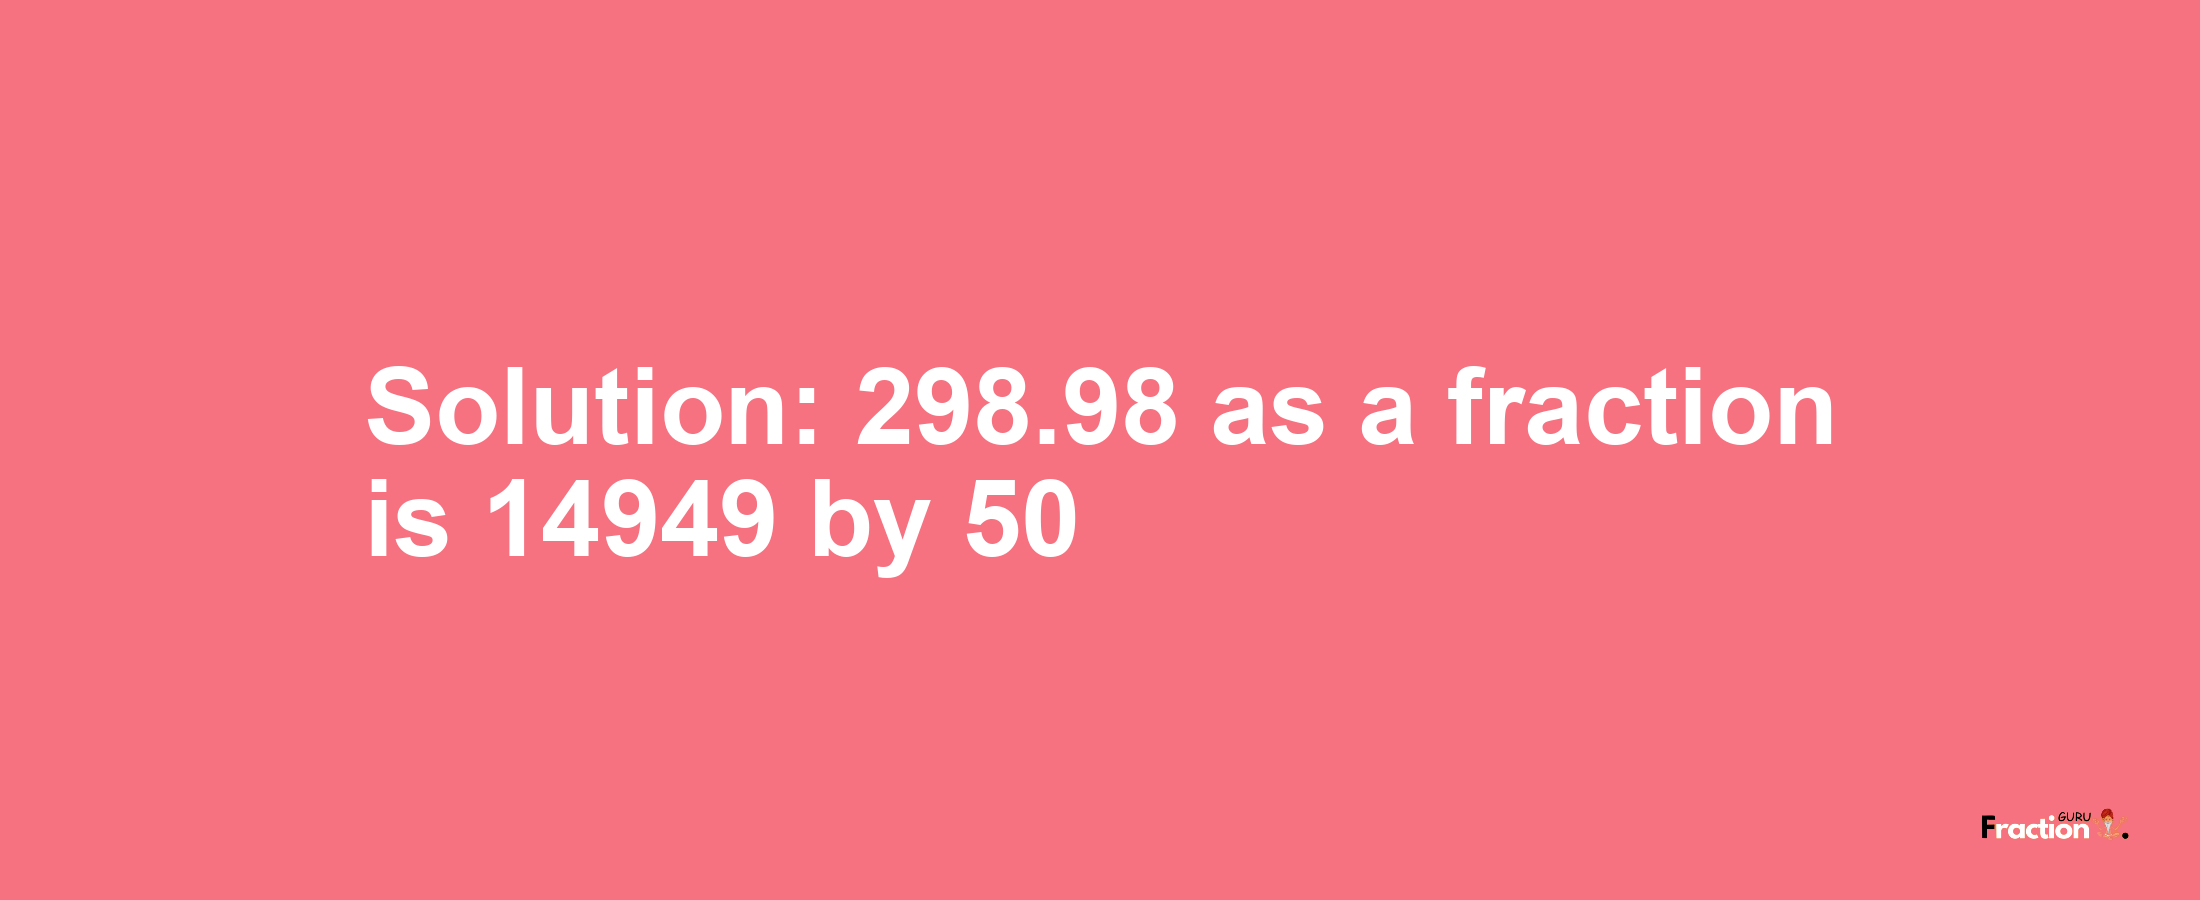 Solution:298.98 as a fraction is 14949/50